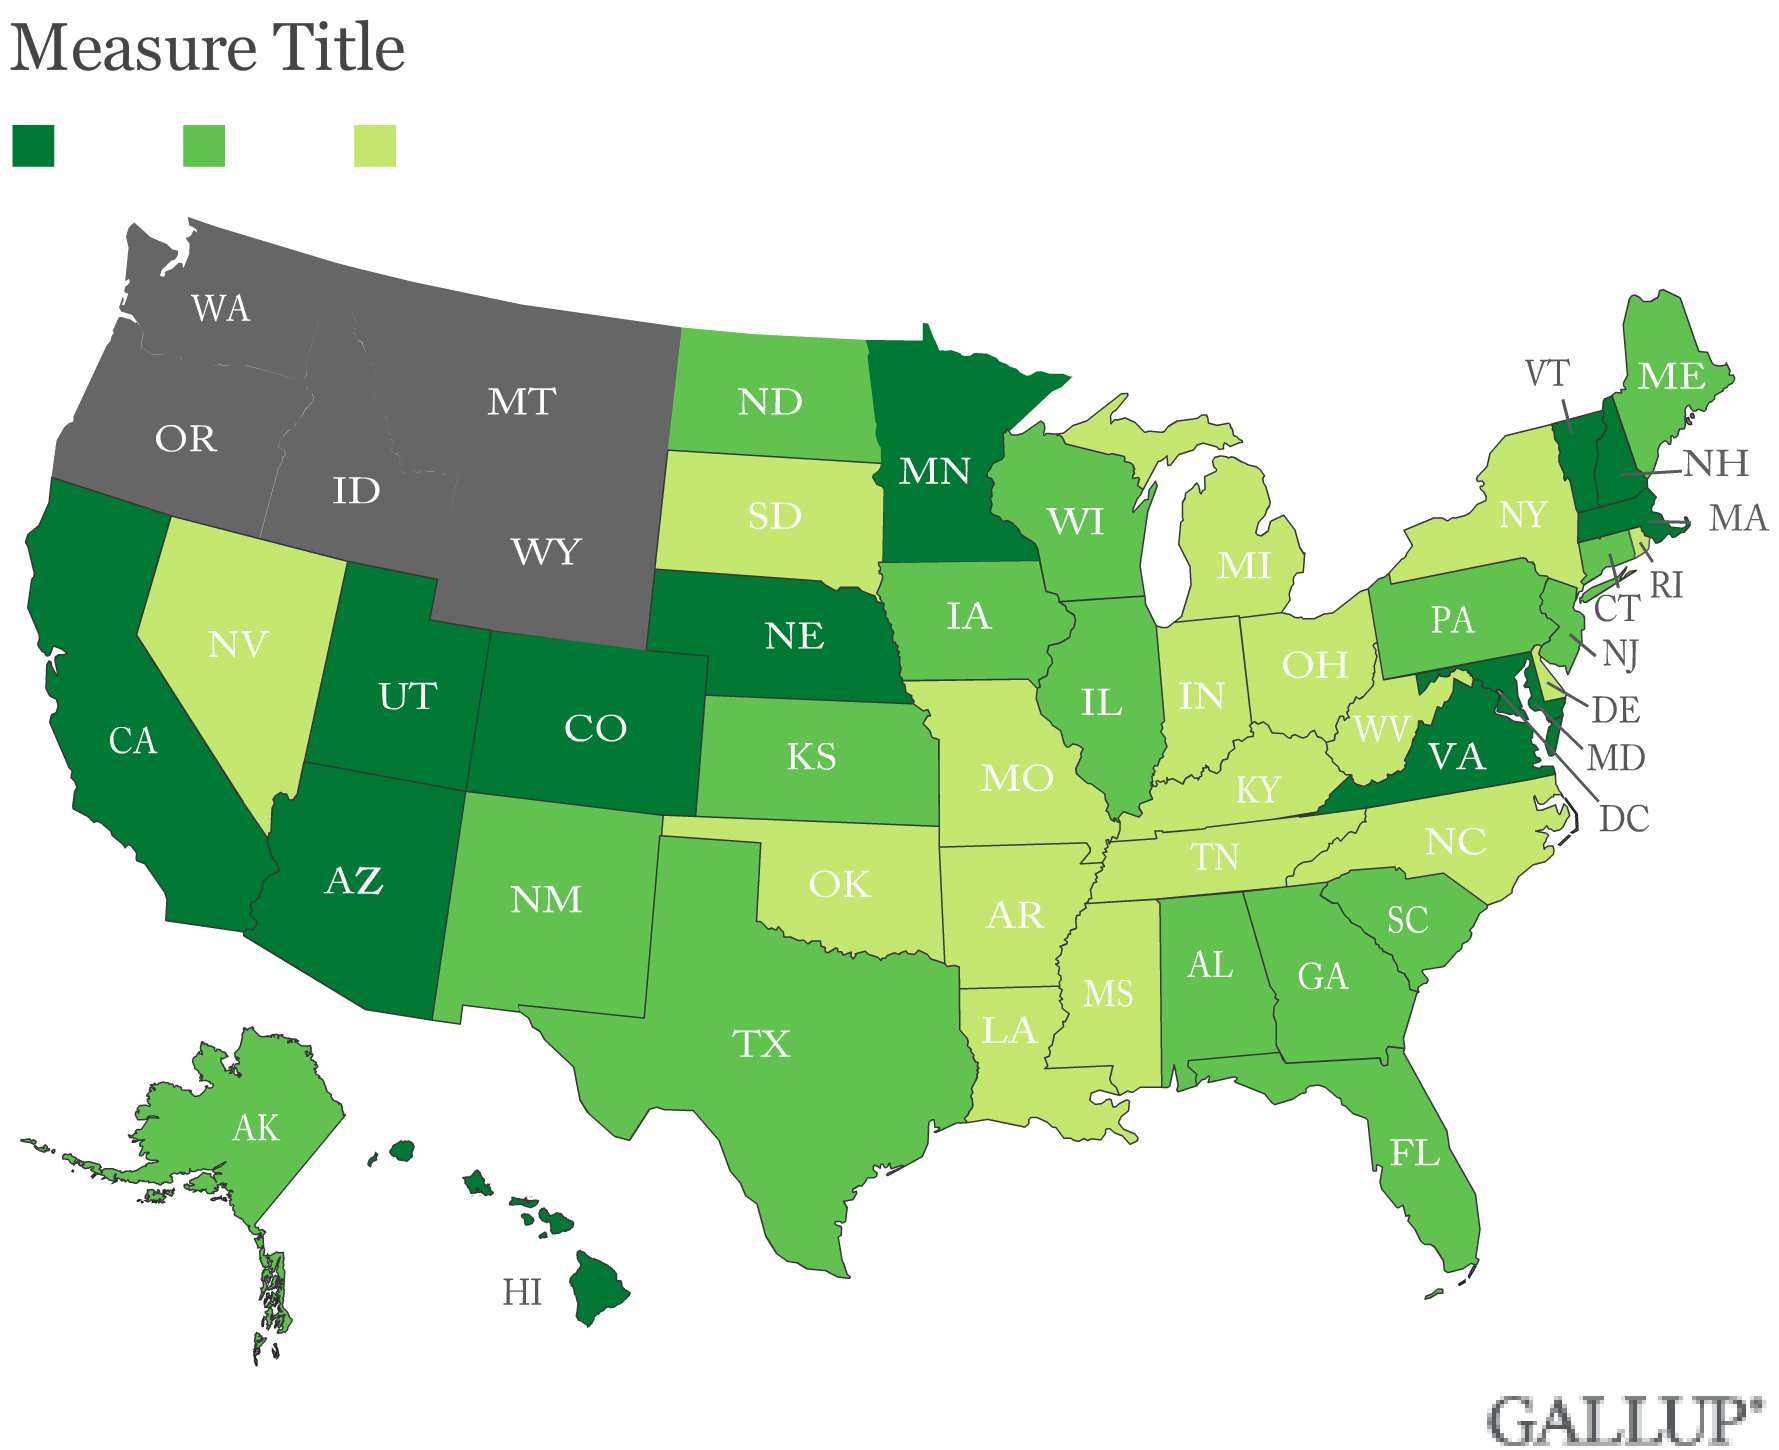 D.C., Hawaii Still Most Approving of Obama; All States Decline